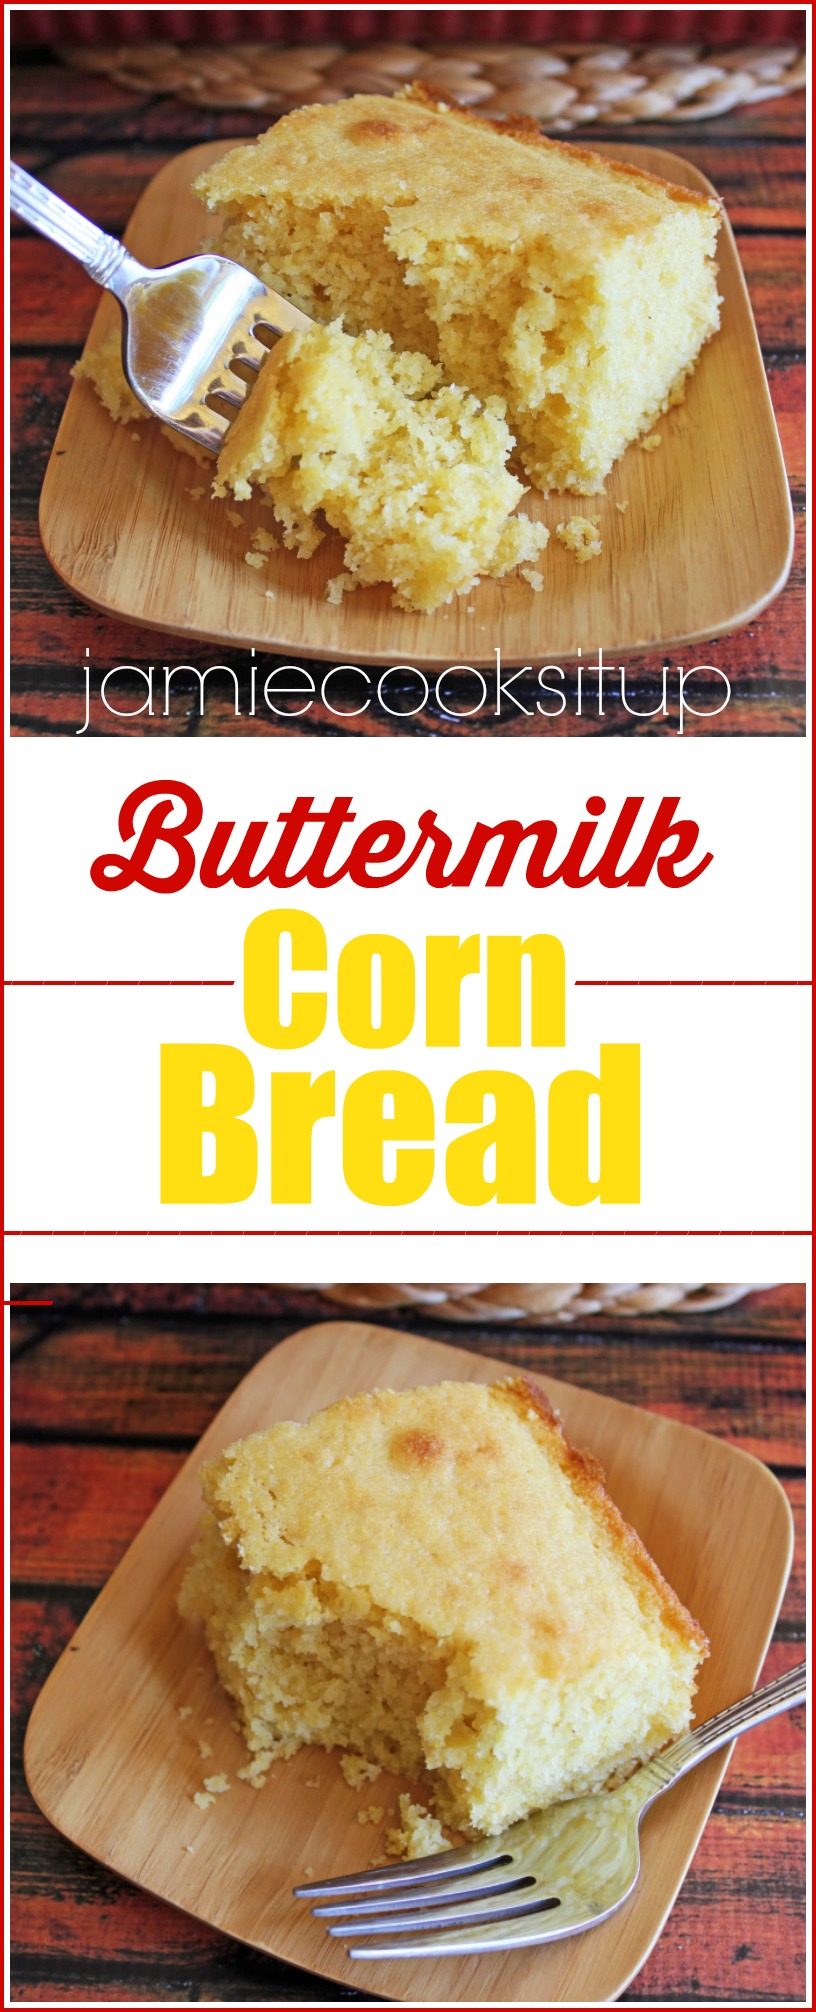 Buttermilk Corn Bread with Jamie Cooks It Up!